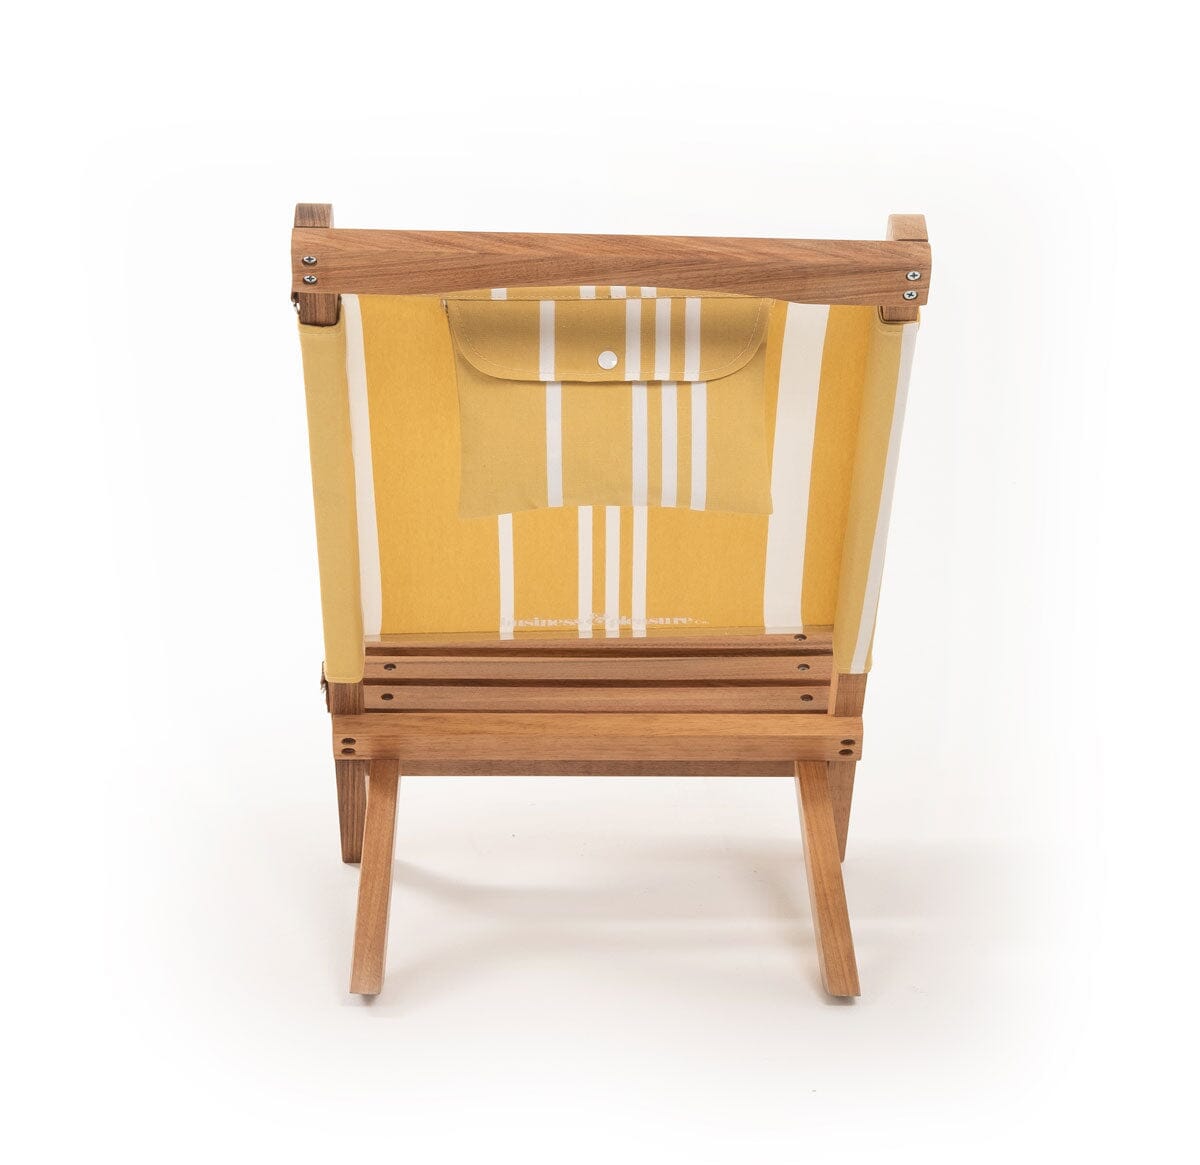 The 2-Piece Chair - Vintage Yellow Stripe